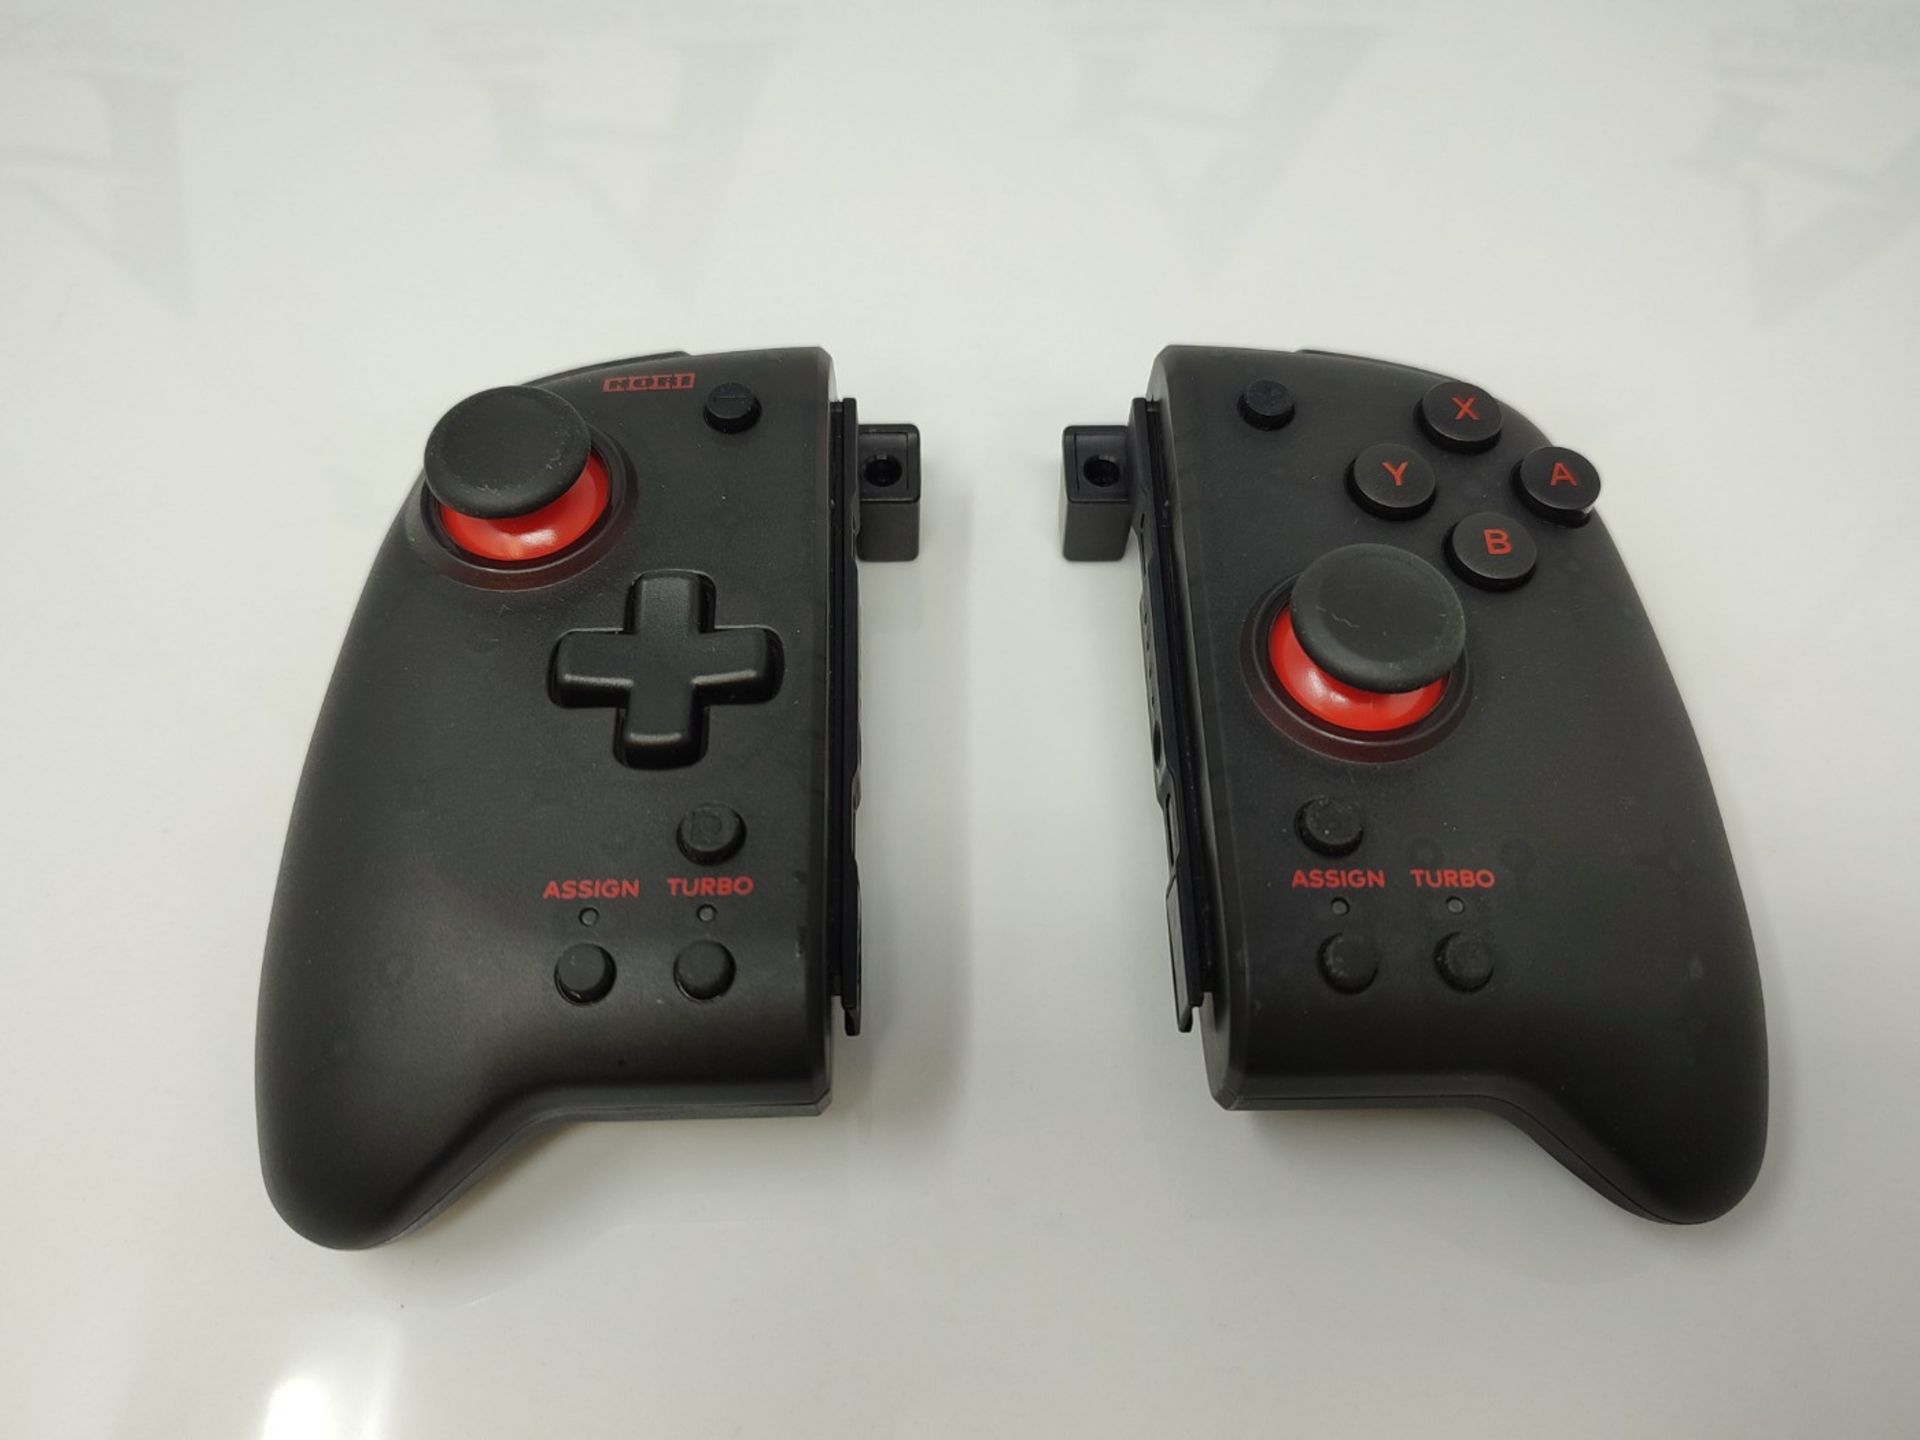 HORI Split Pad Pro (Black) Handheld Controller for Nintendo Switch - Officially Licens - Image 2 of 2